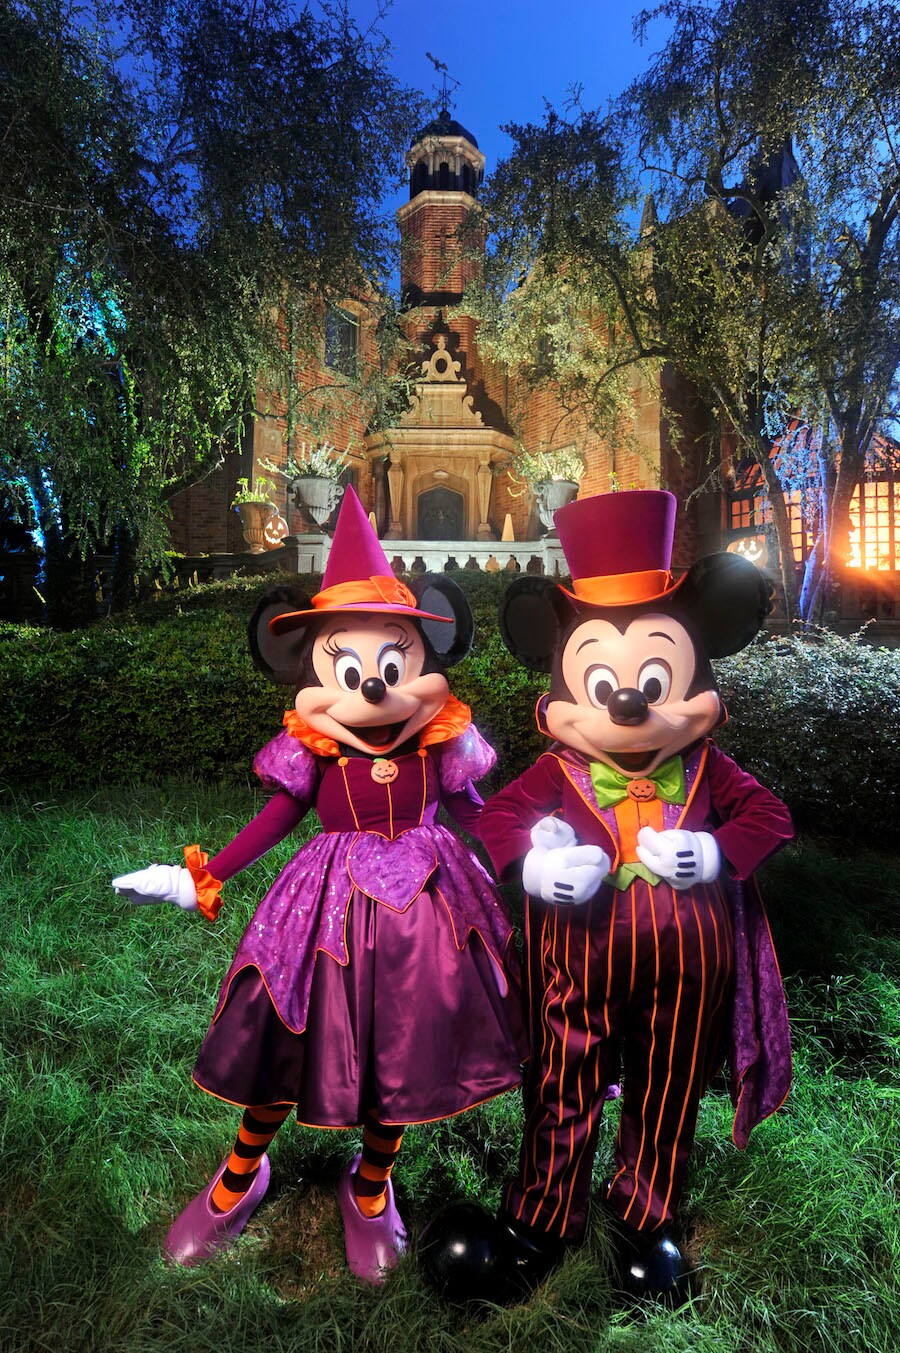 See Disney Characters in Halloween Costumes During Mickey's Not-So-Scary Halloween Party